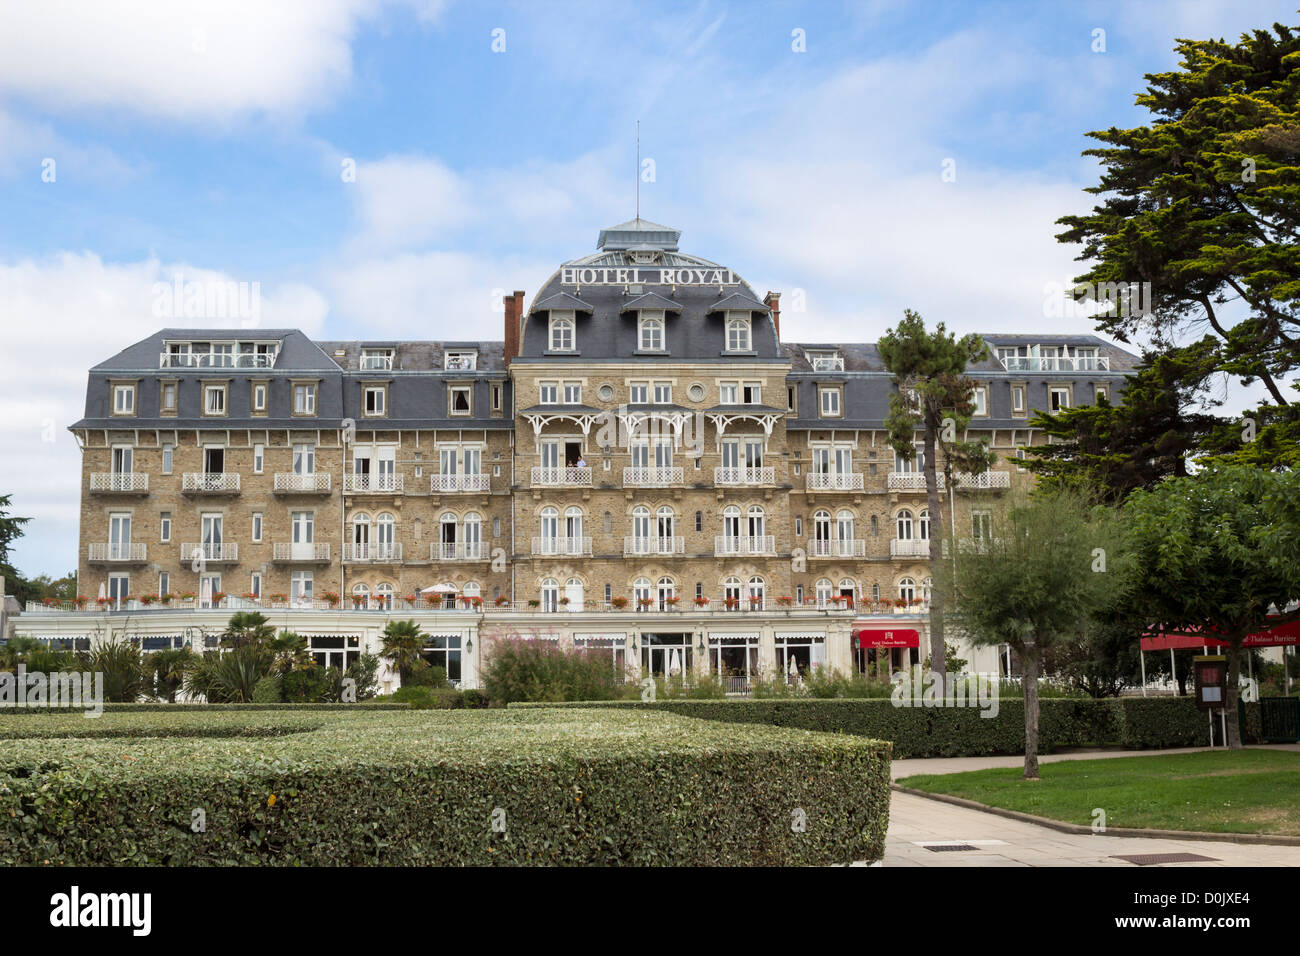 Facade of the Hotel Royal Barriere in La Baule, Brittany, France Stock Photo